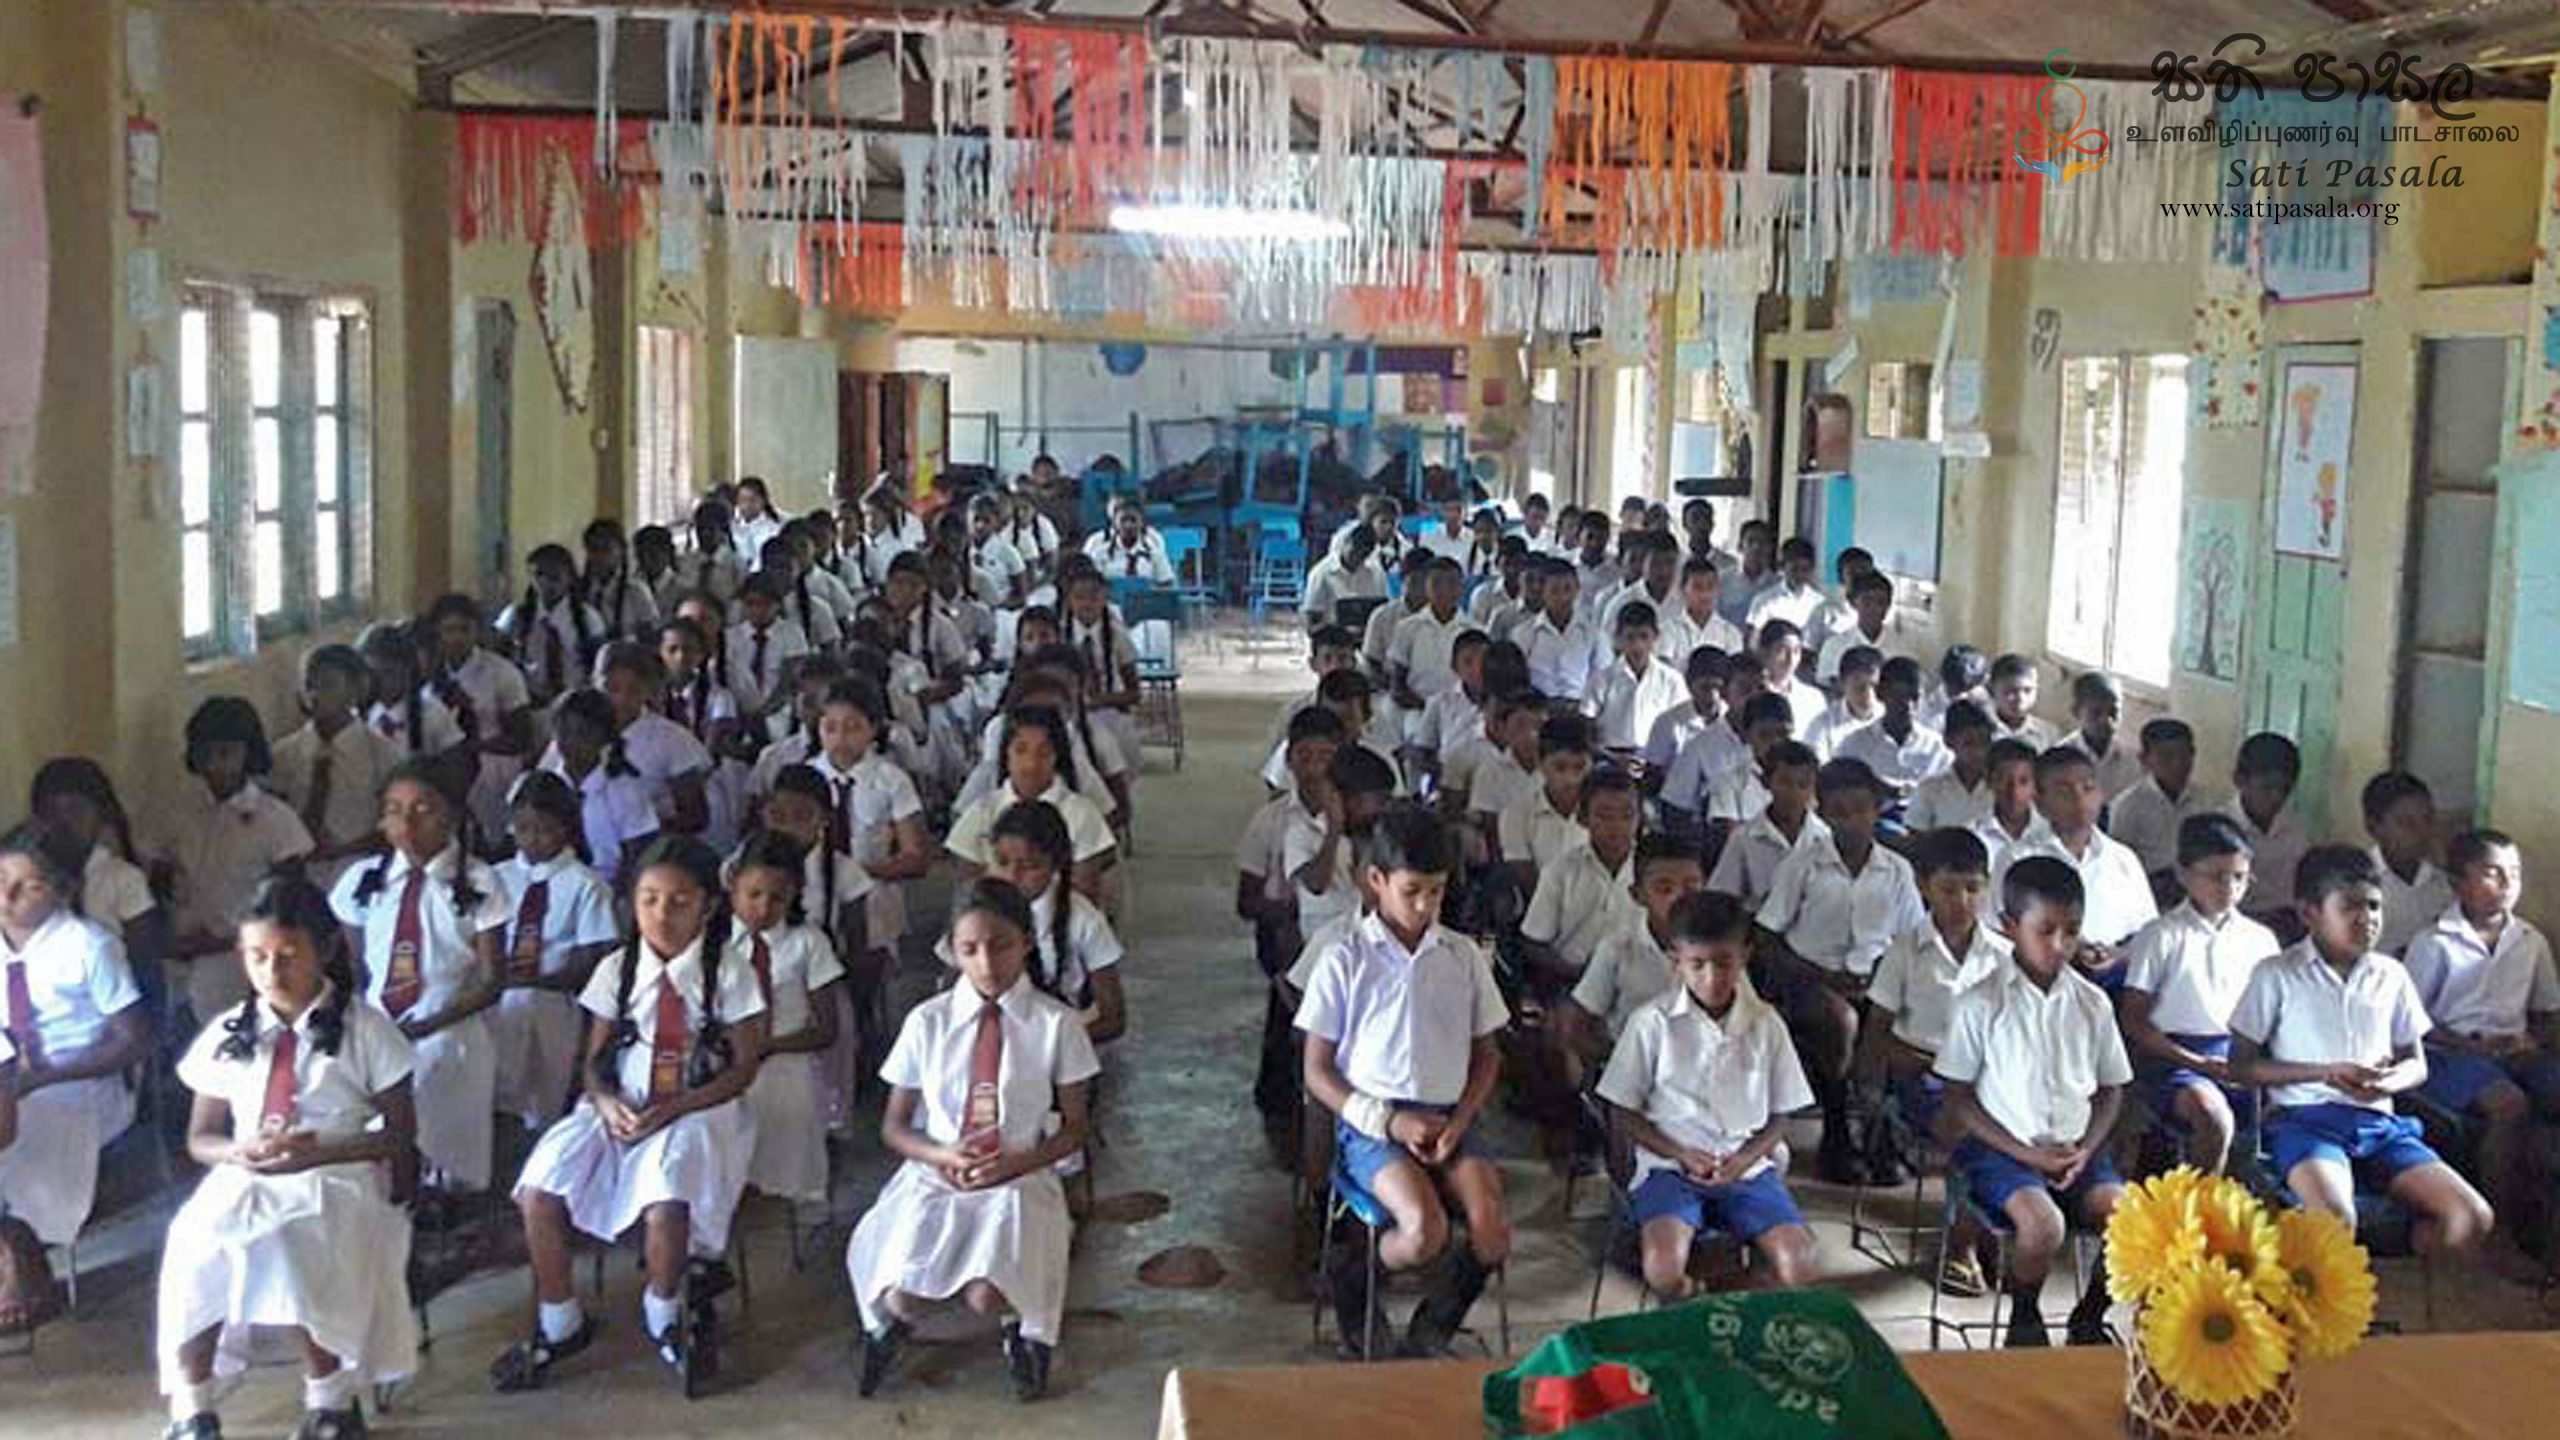 Sati Pasala program was held at Doragala MV, Kothmale on the 1st of October 2019. About 200 students from grades 1 to 11 participated in the program which was conducted by Ven. Rajasinghegama Thilakadhamma Thero. Mindful facilitators conducted key mindful activities such as mindful sitting, mindful walking, mindful eating, mindful listening, and several mindful games to give the message of mindfulness to the participants.